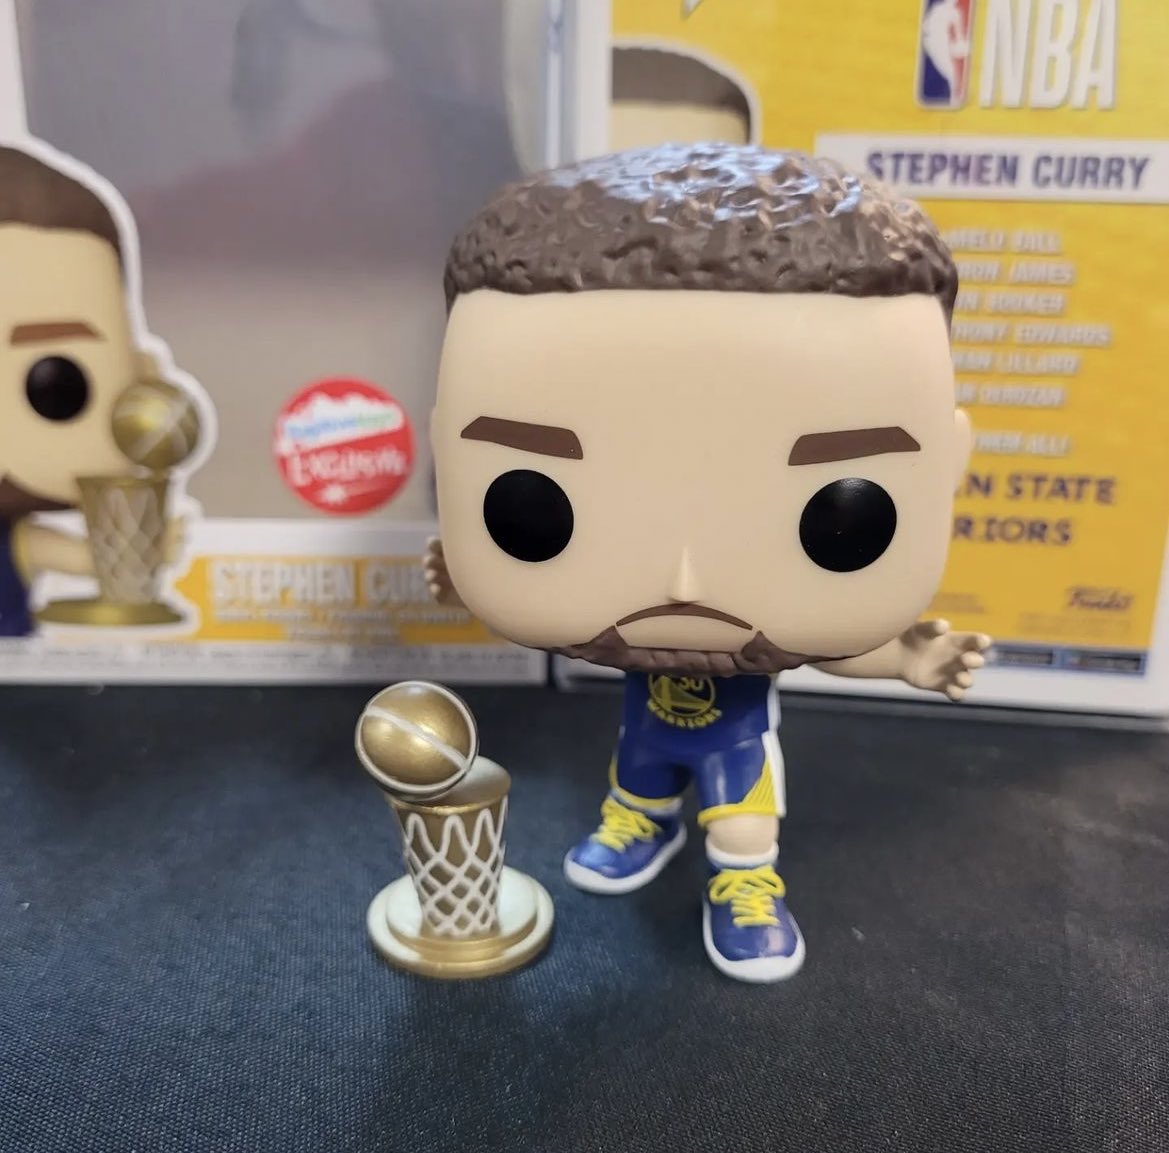 First look at the new Fugitive Toys exclusive Stephen Curry Funko POP! Thanks @fugitivetoys via @funkoinfo_ ~ #NBA #StephenCurry #FPN #FunkoPOPNews #Funko #POP #POPVinyl #FunkoPOP #FunkoSoda